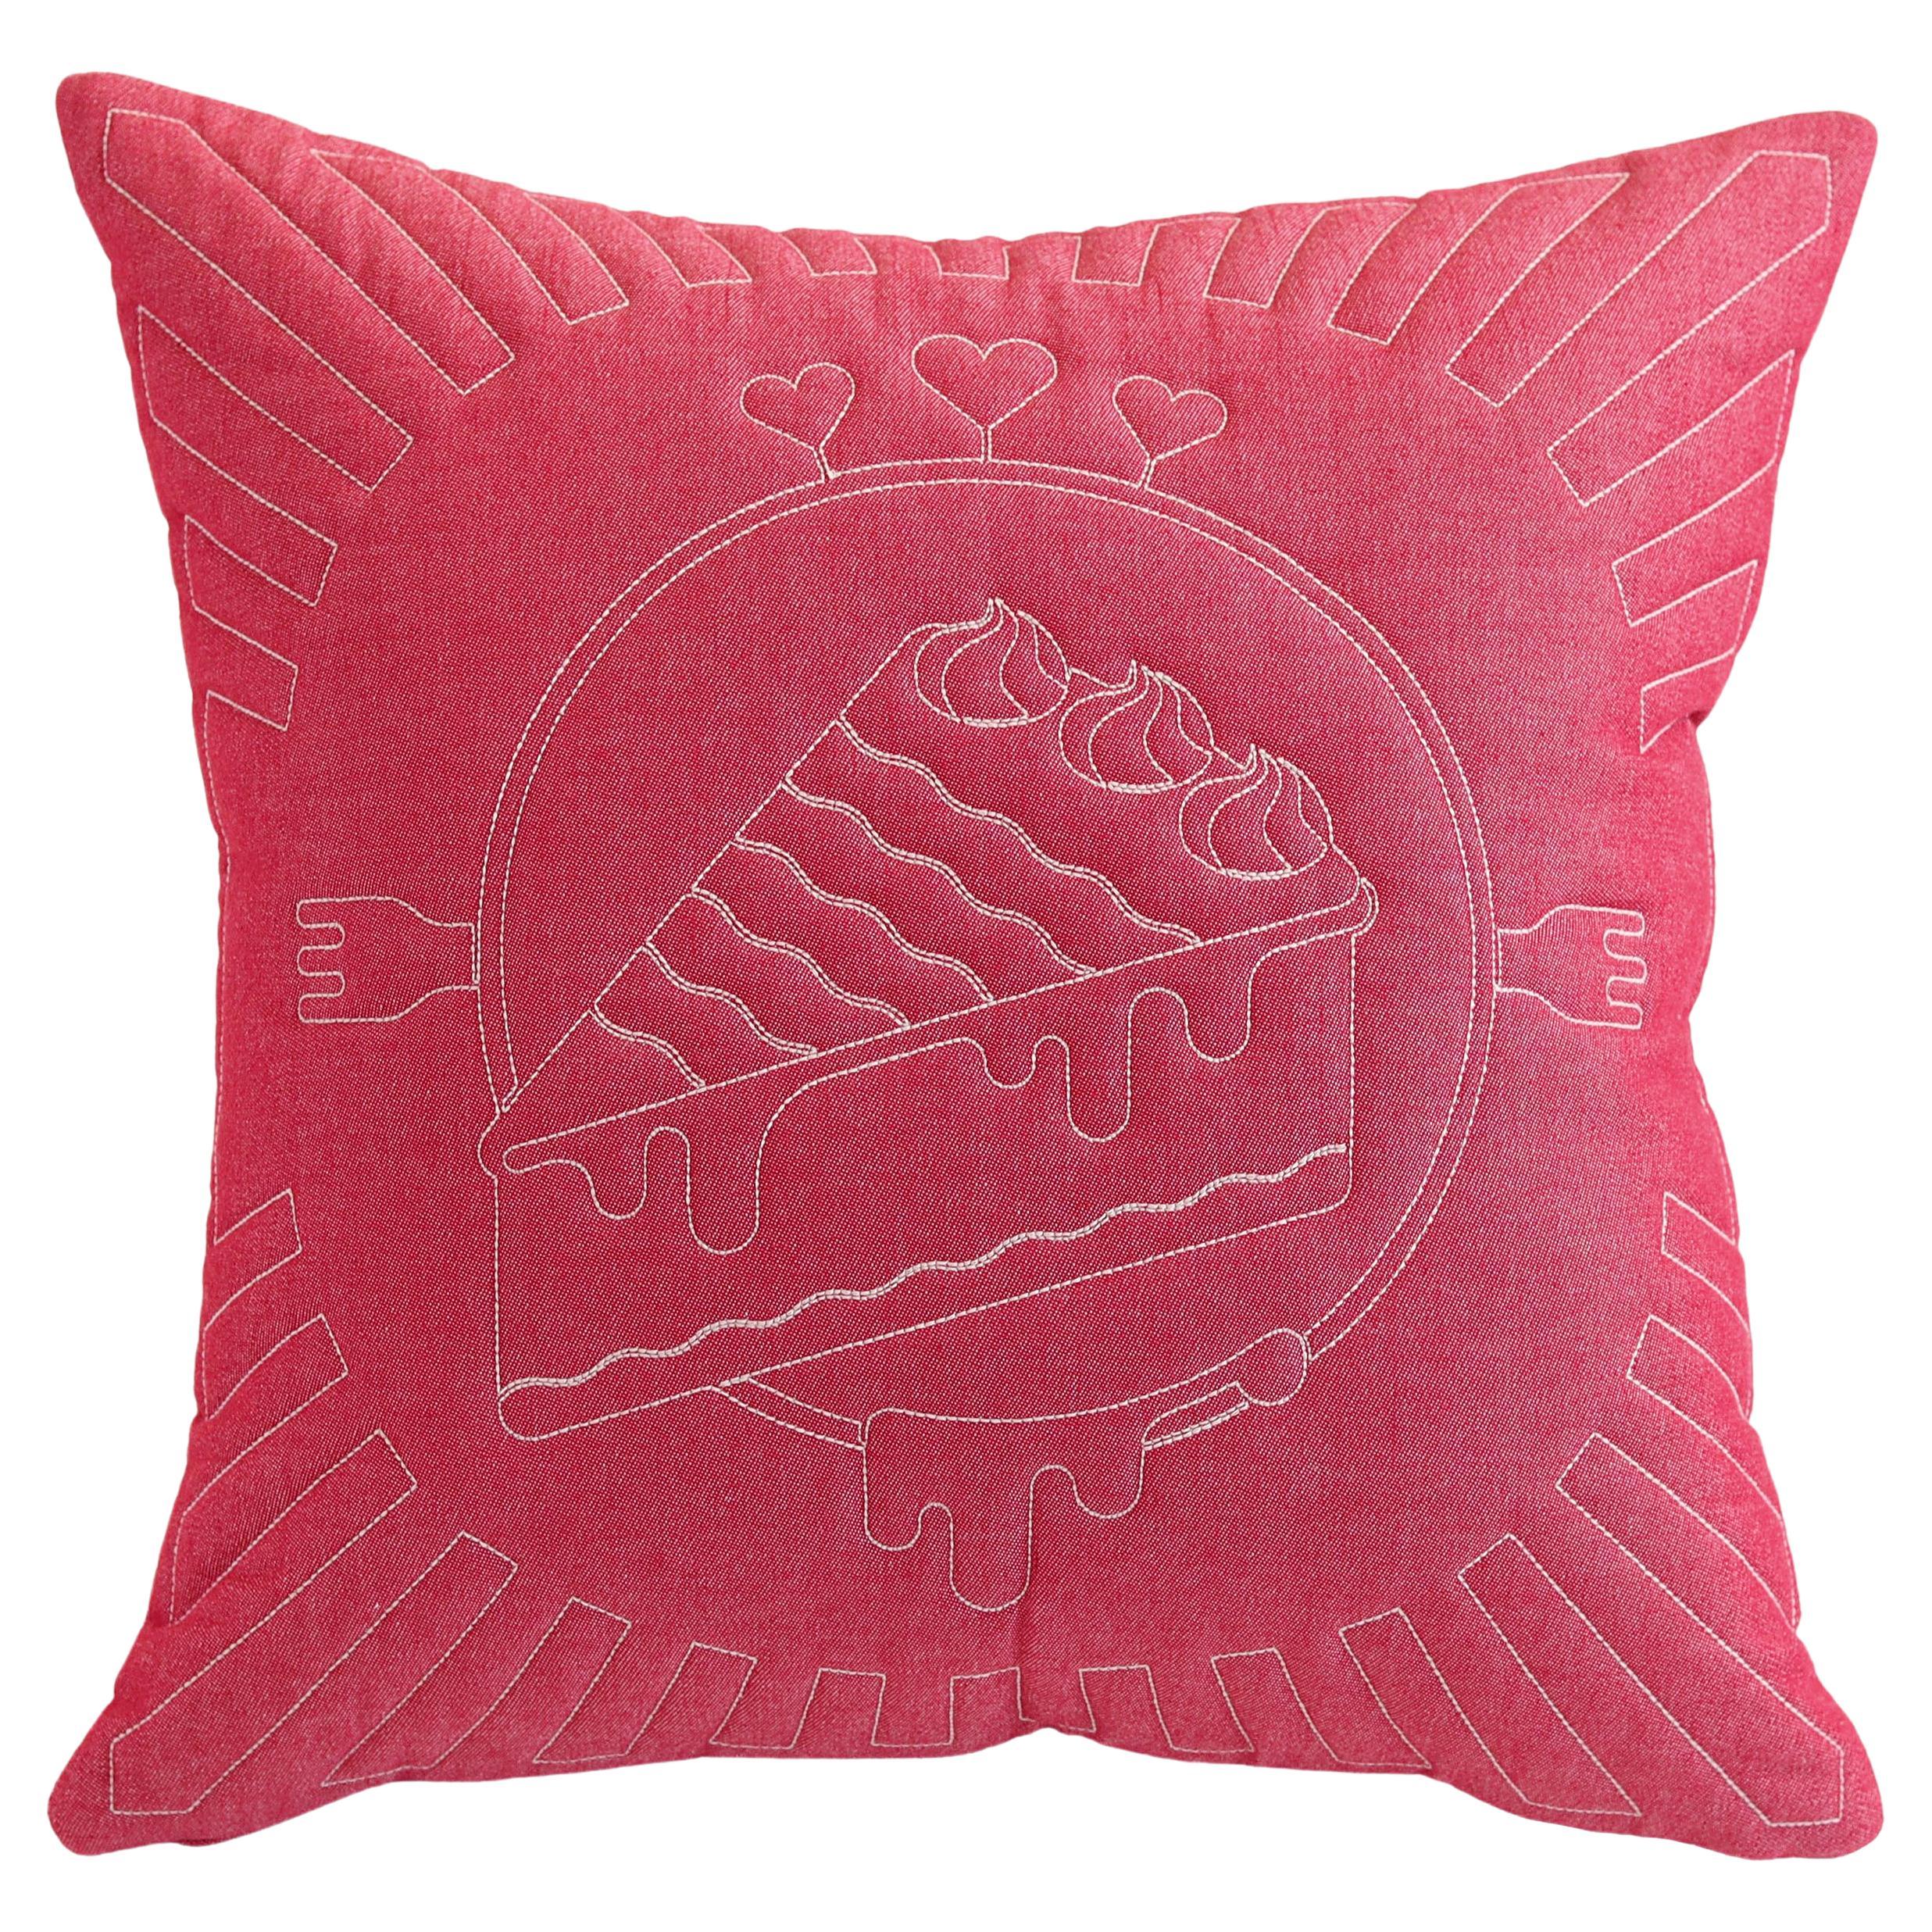 Red Cotton Matelasse Cake Pillow by Paulo Kobylka For Sale